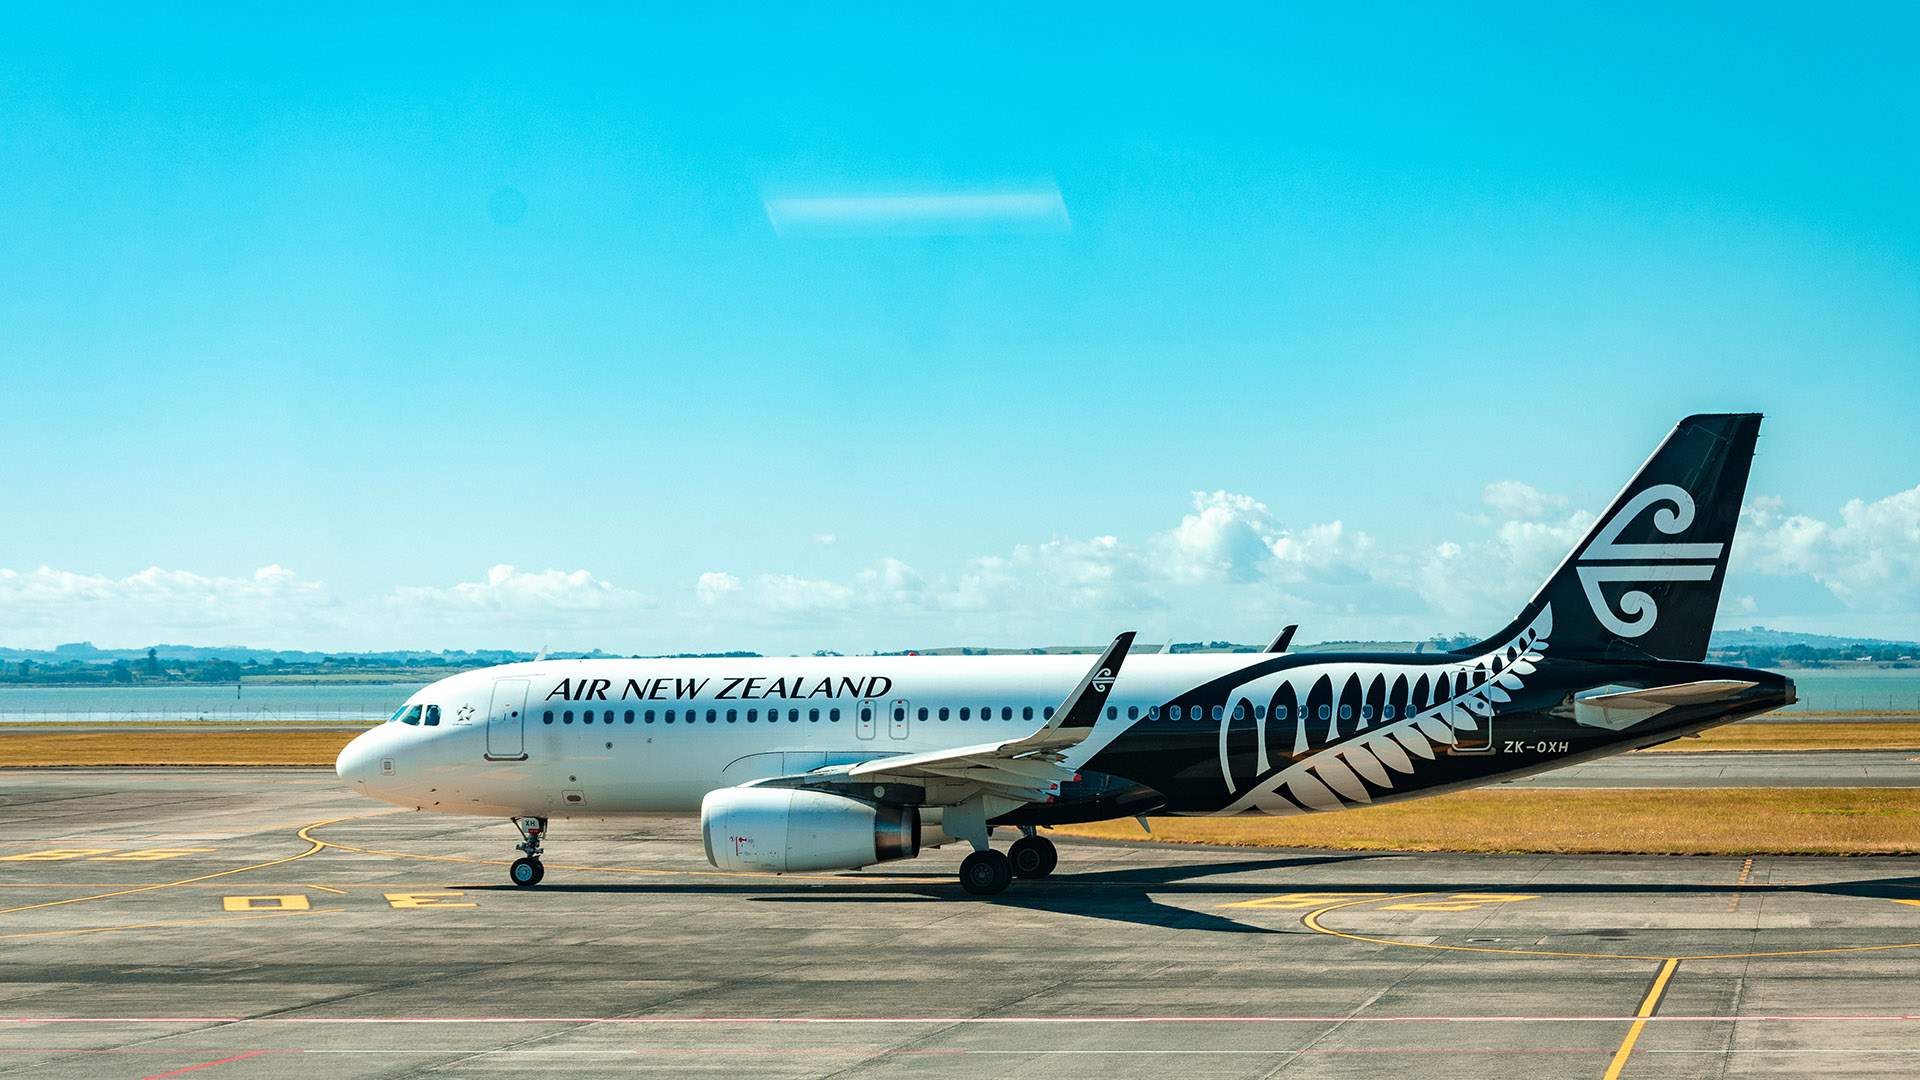 Air New Zealand Has Been Named the World's Safest Airline for 2022